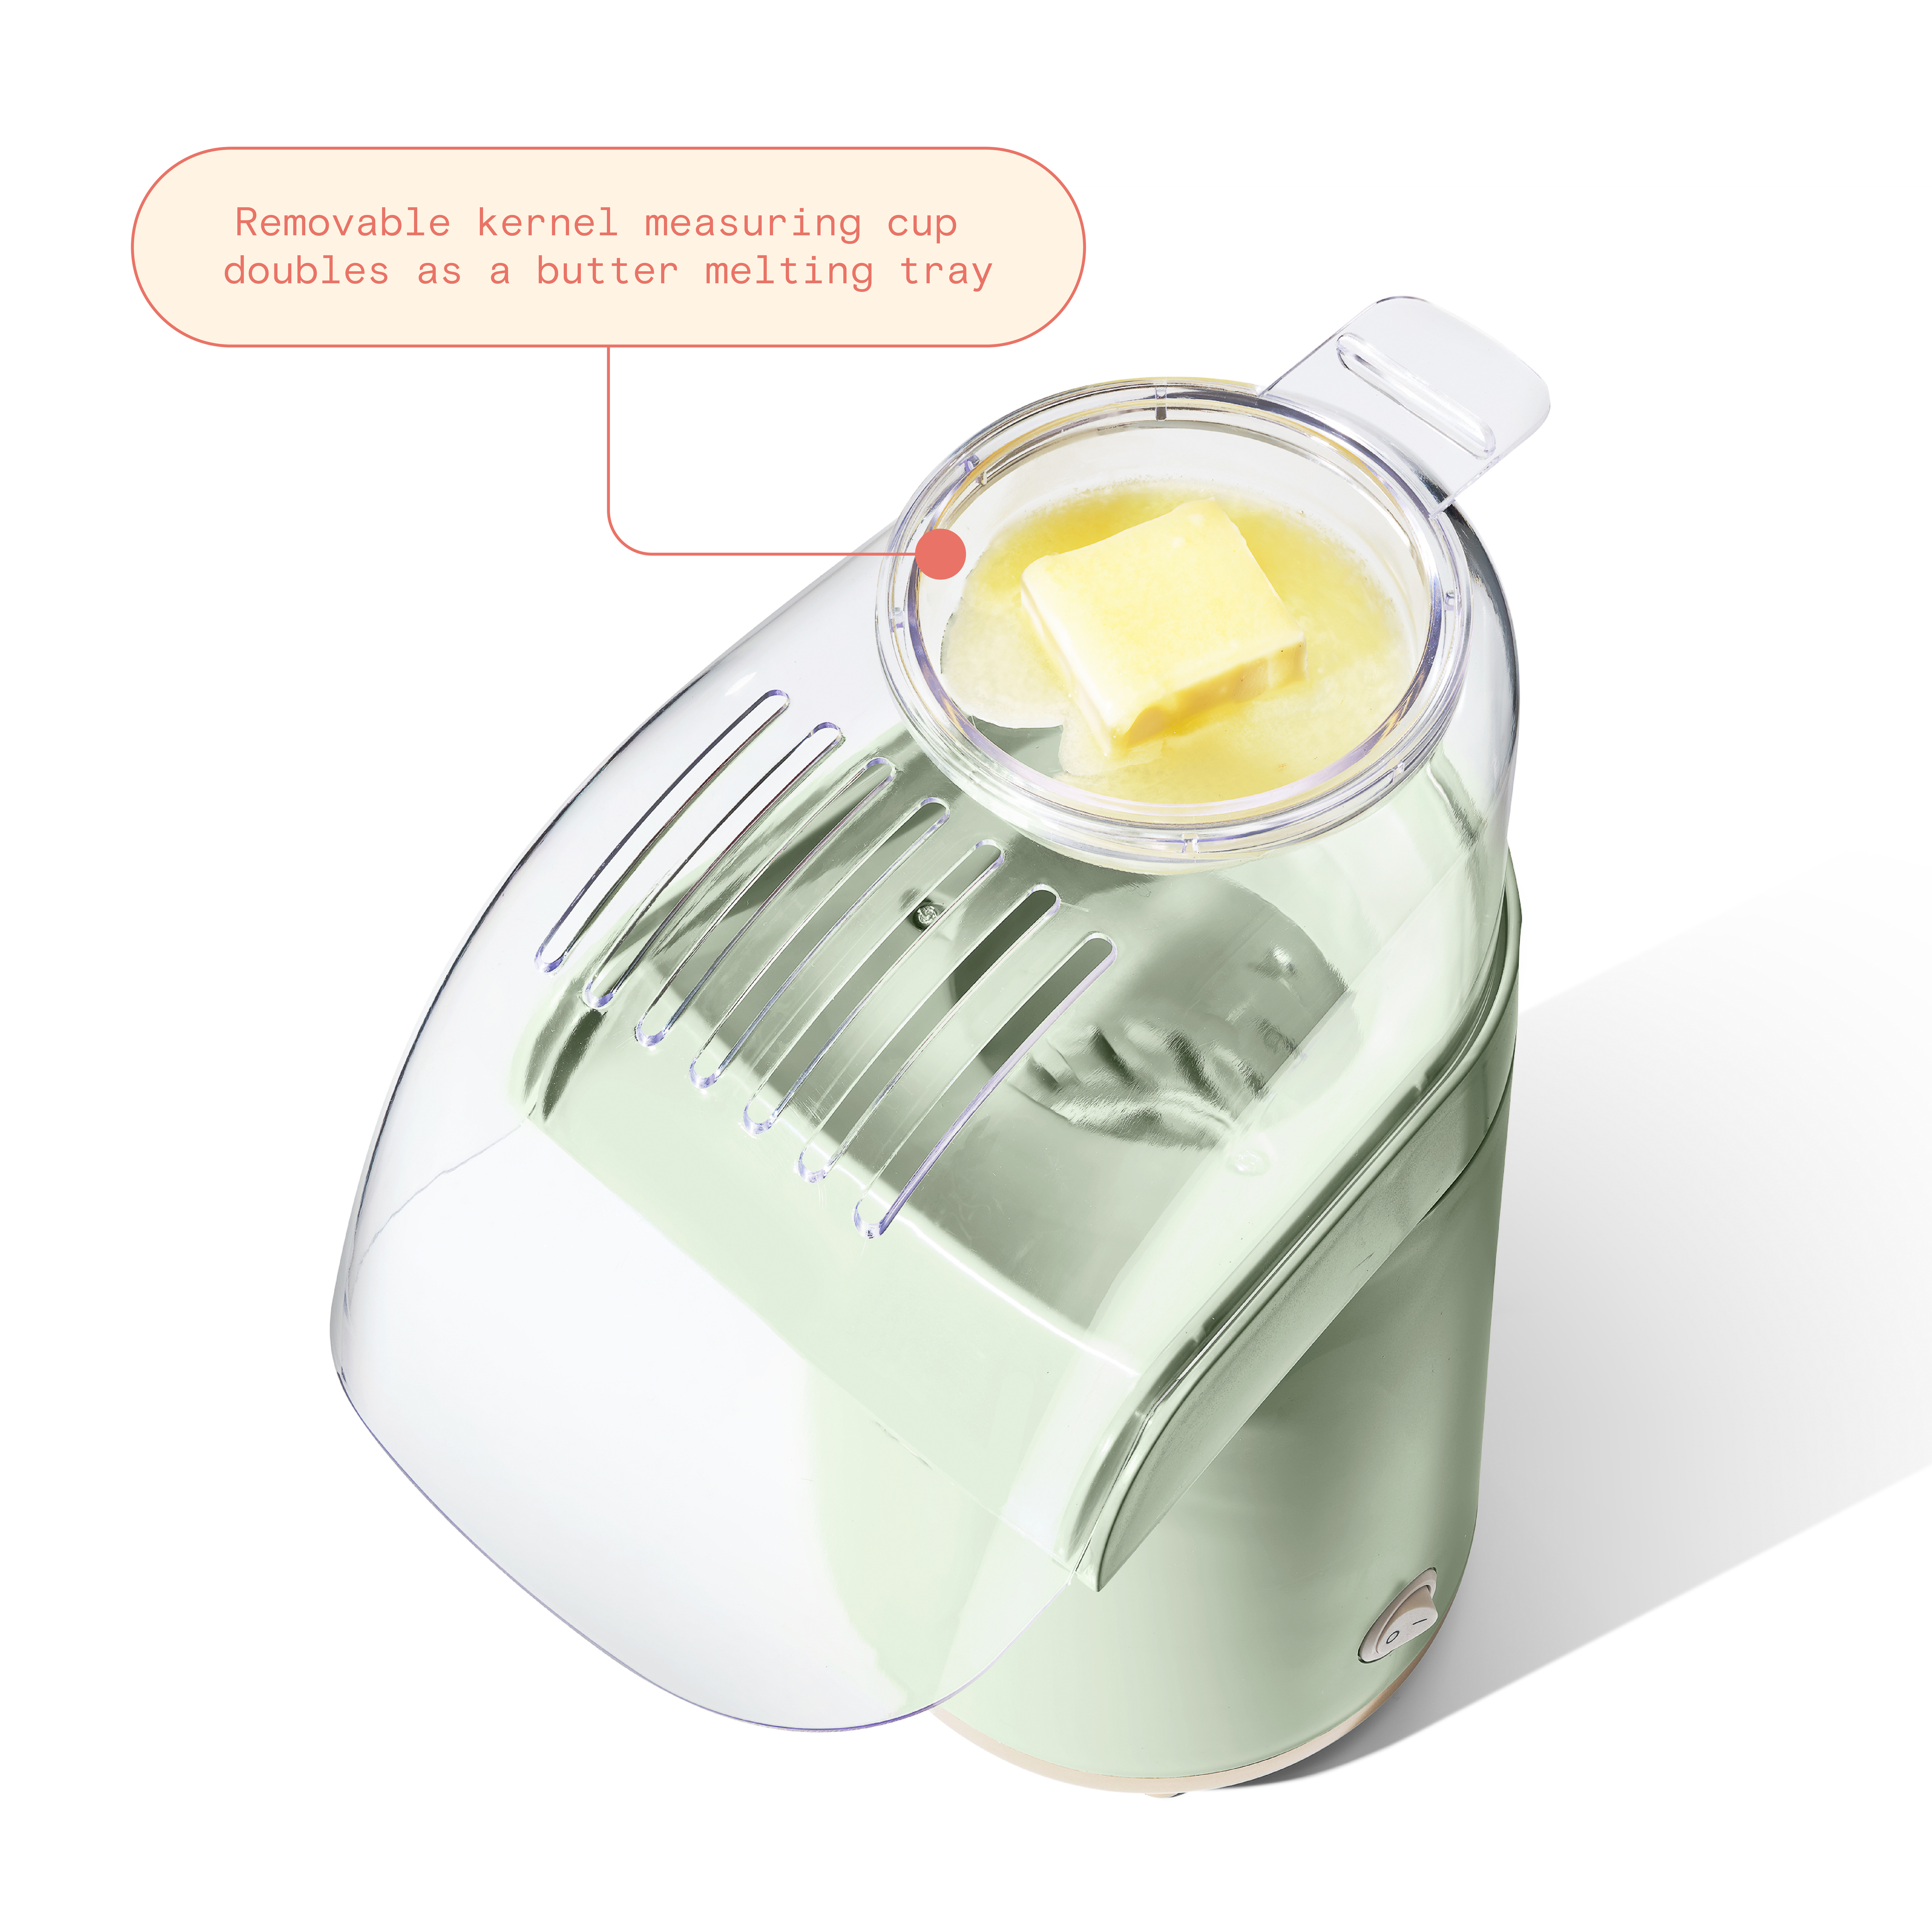 Beautiful 16 Cup Hot Air Electric Popcorn Maker, Sage Green by Drew Barrymore - image 5 of 13